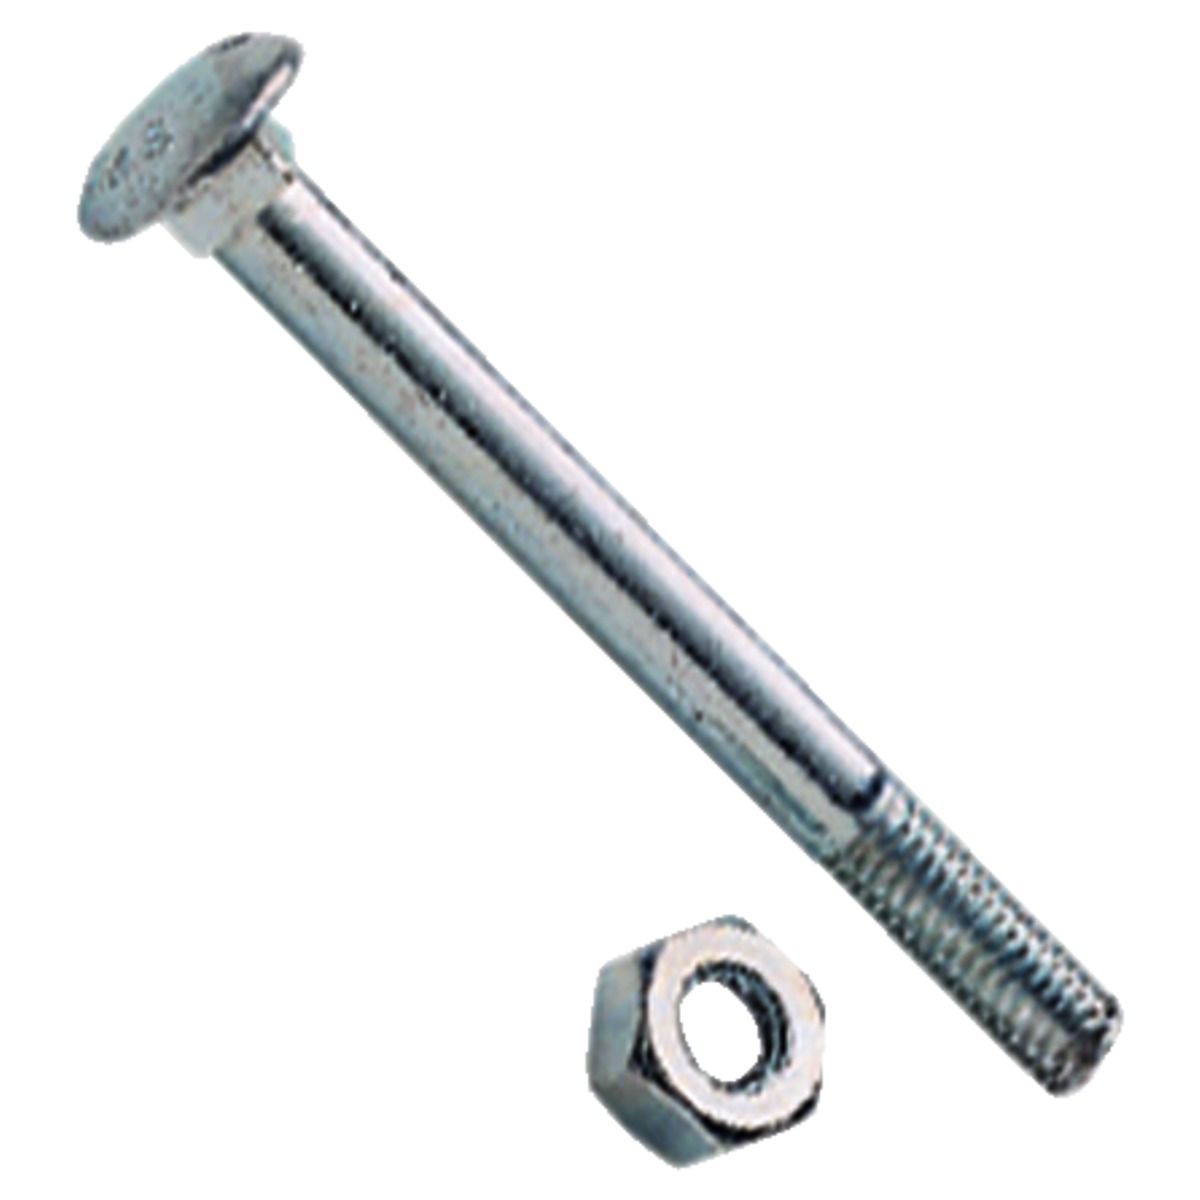 Image of Wickes Carriage Bolt Nut & Washer - M10 x 75mm Pack of 6